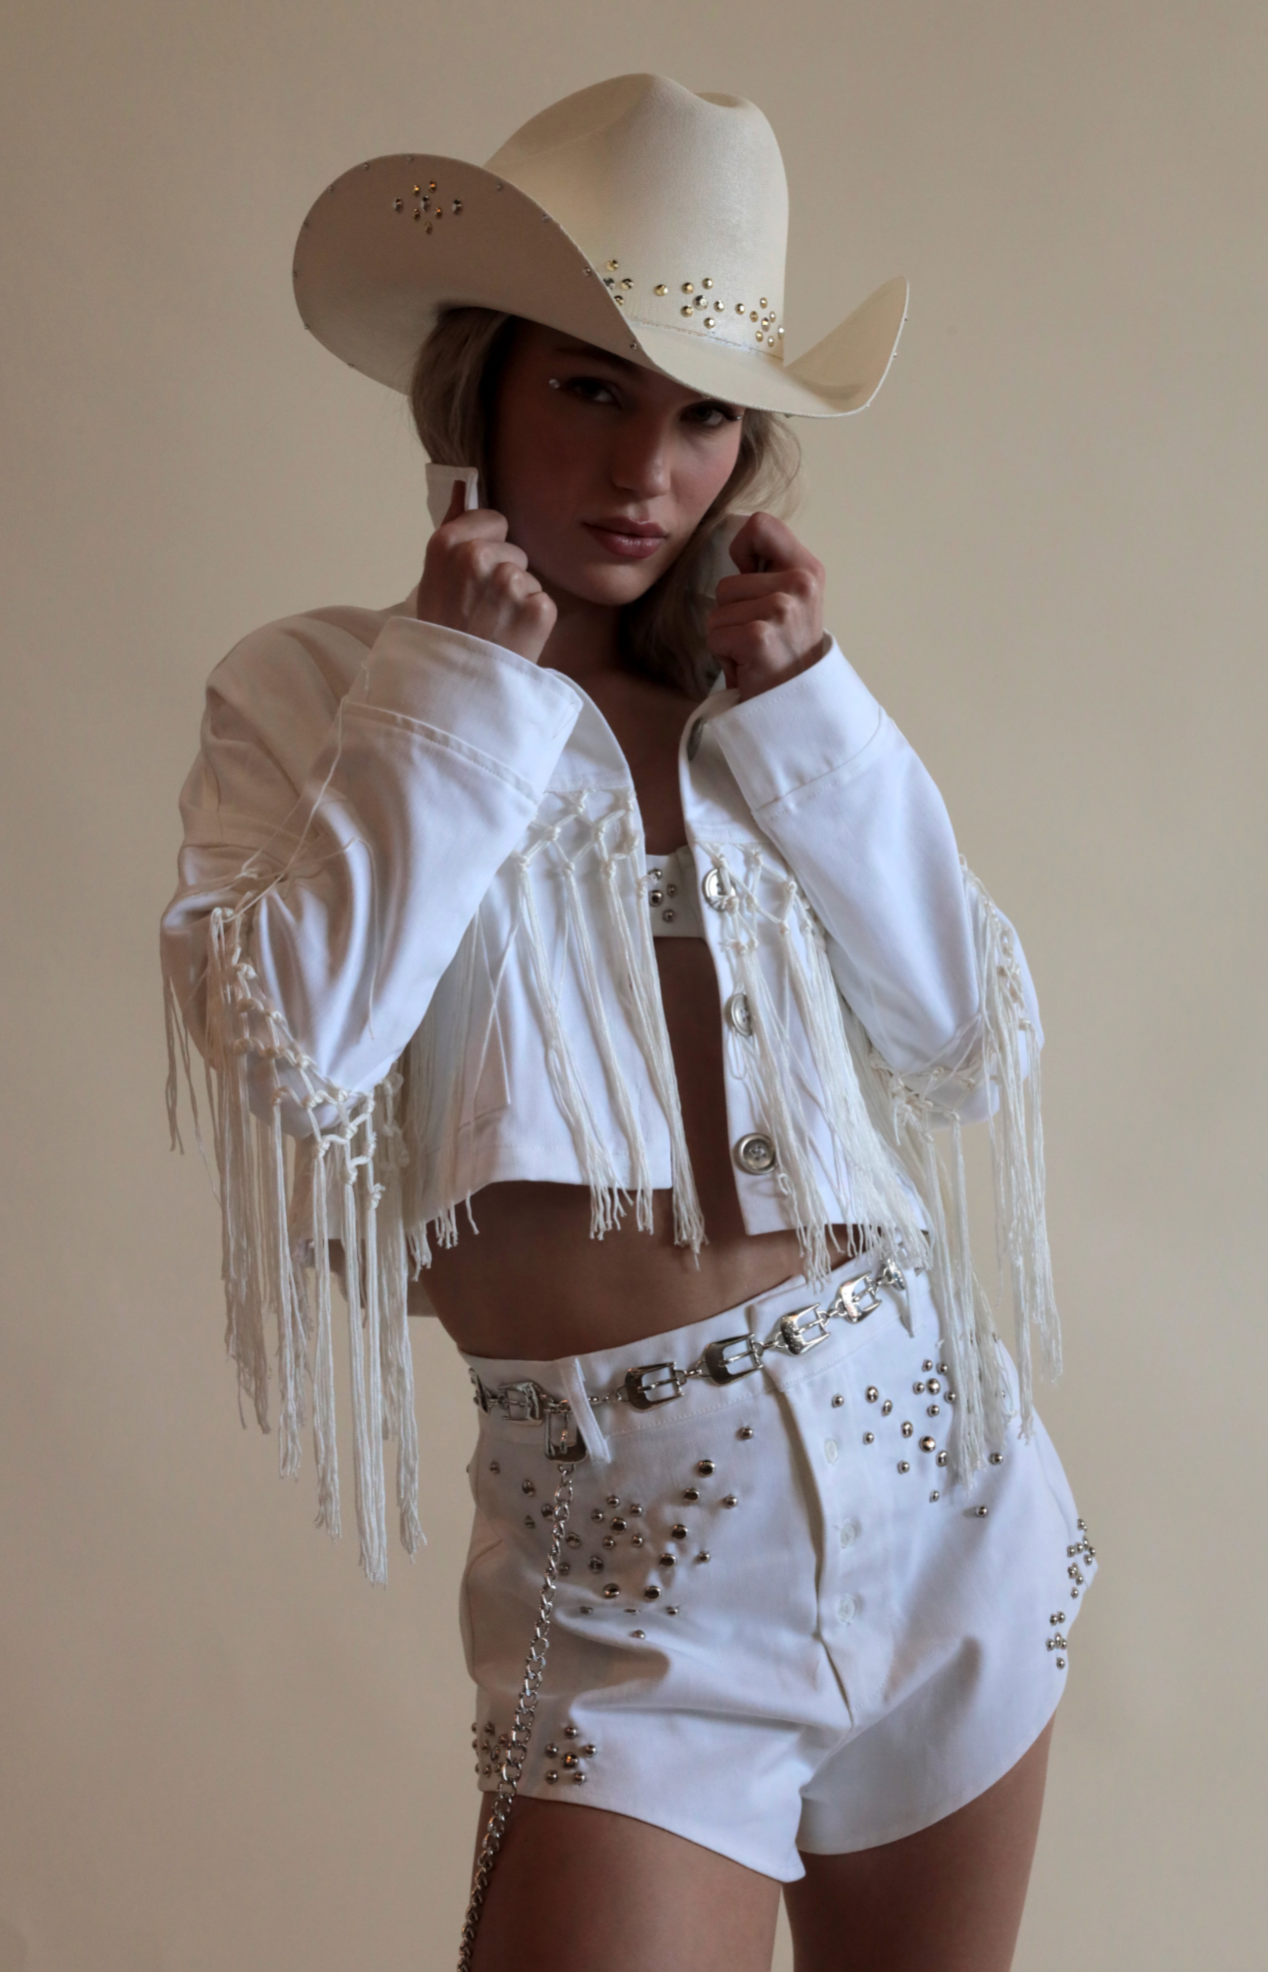 White cowboy hat with metallic jewels paired with denim grommeted set and fringe jacket.